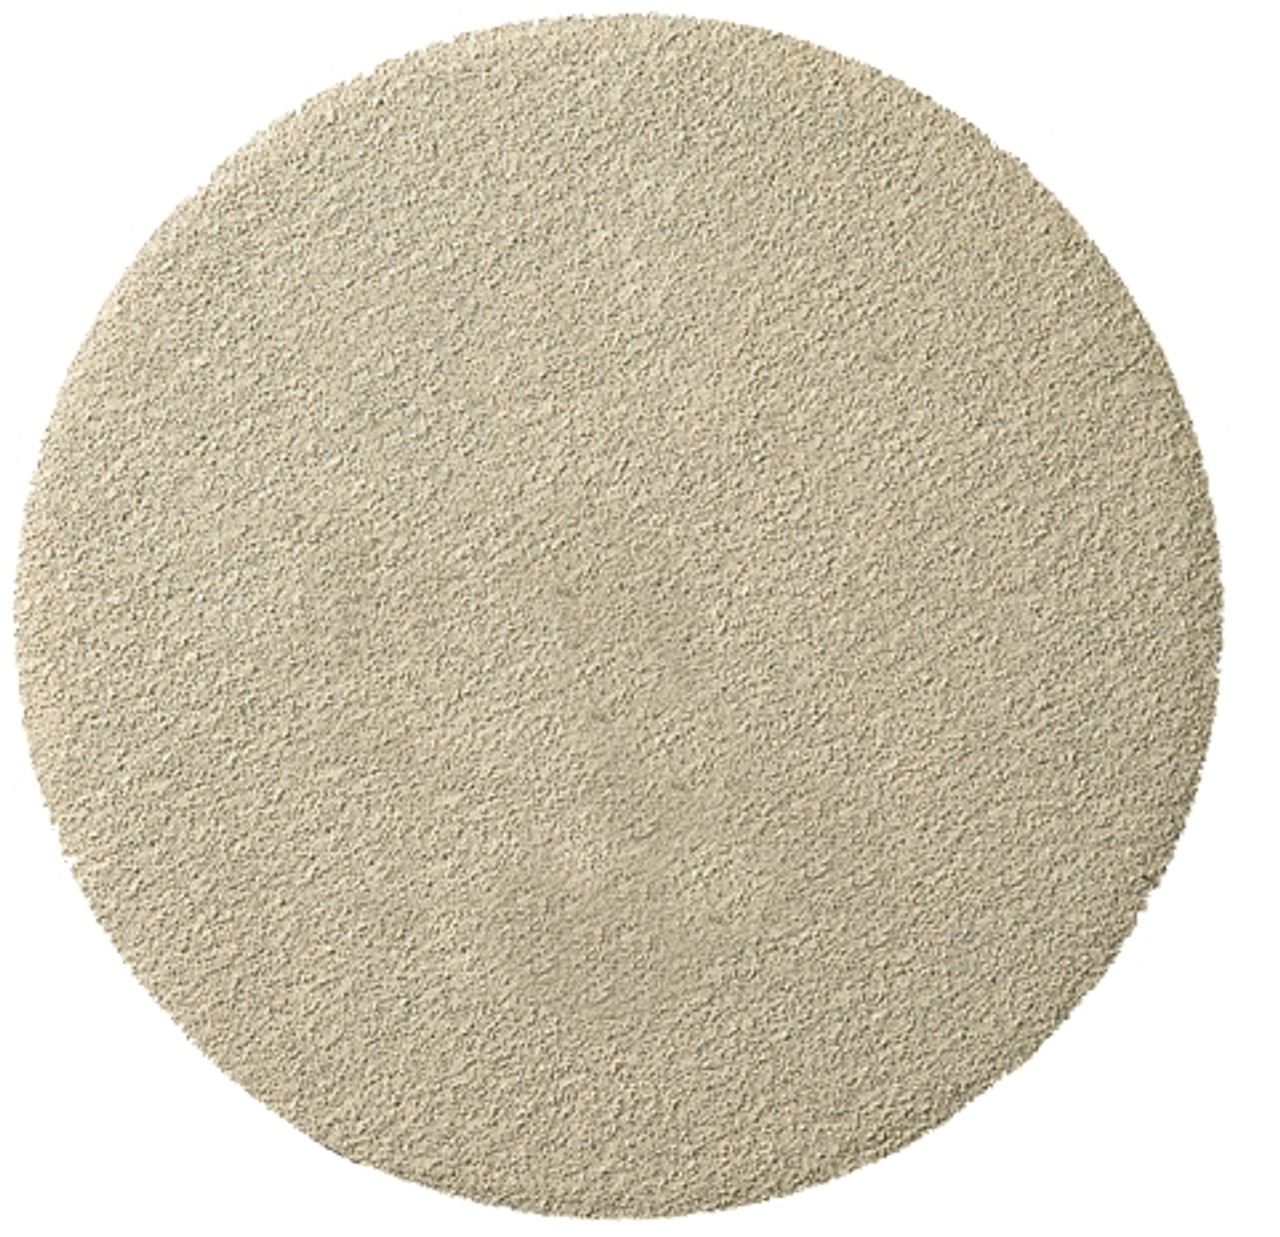 Self Fastening Disc - (Ps33) Paper/Aluminium Oxide/No Hole 120Grit 150Mm